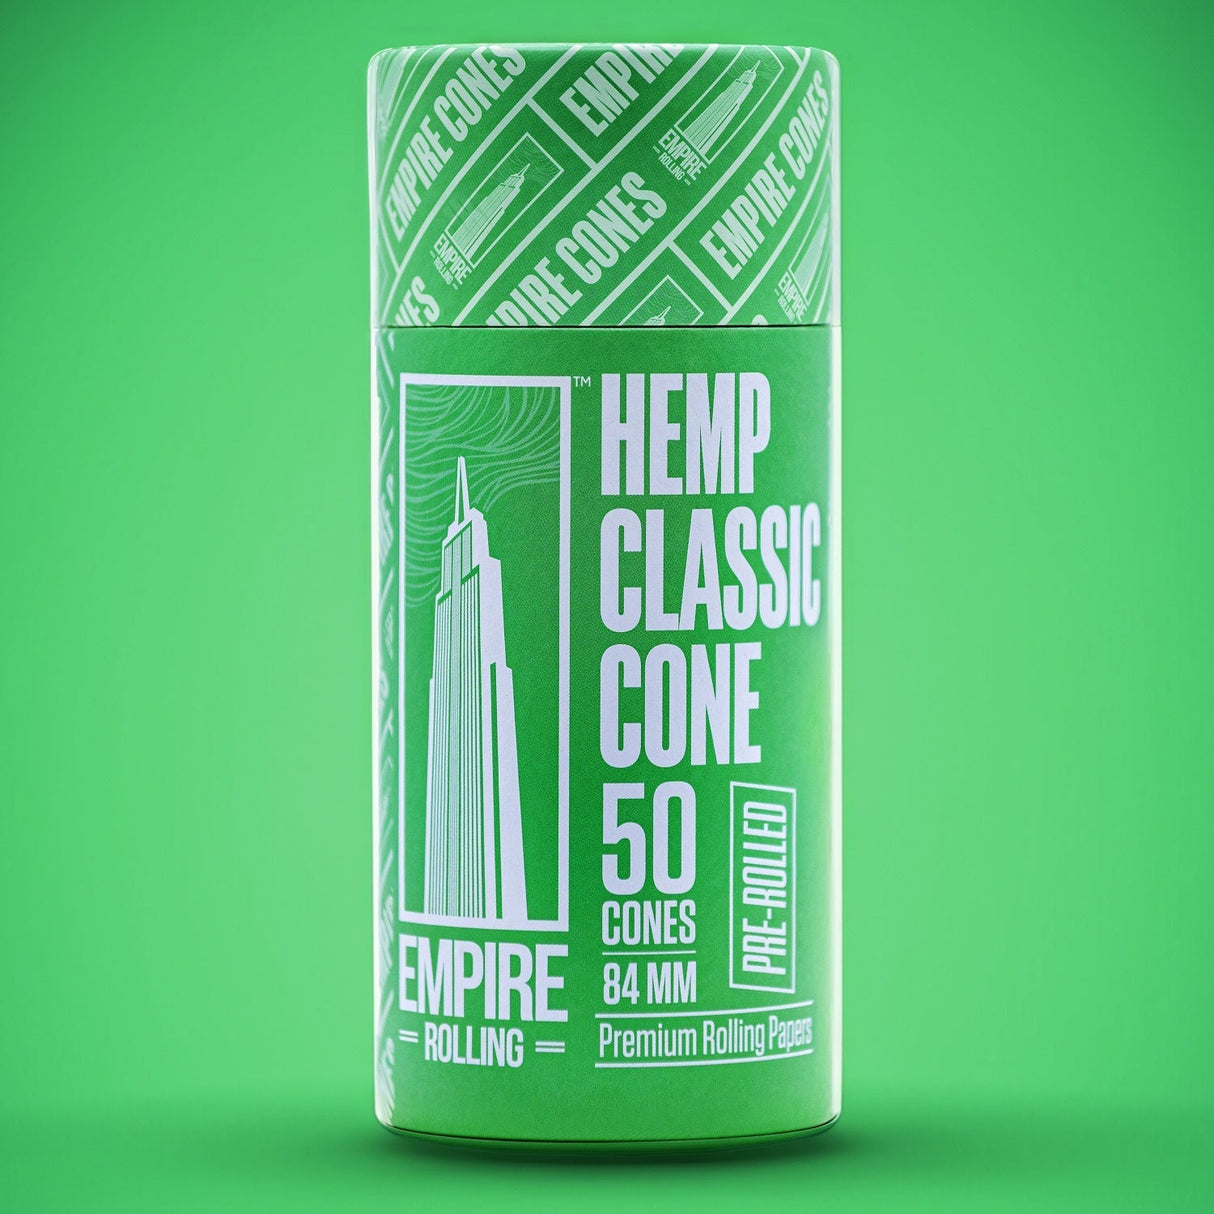 Empire Rolling Papers Ultra Smooth Hemp Cones 50 Pack, Front View on Green Background